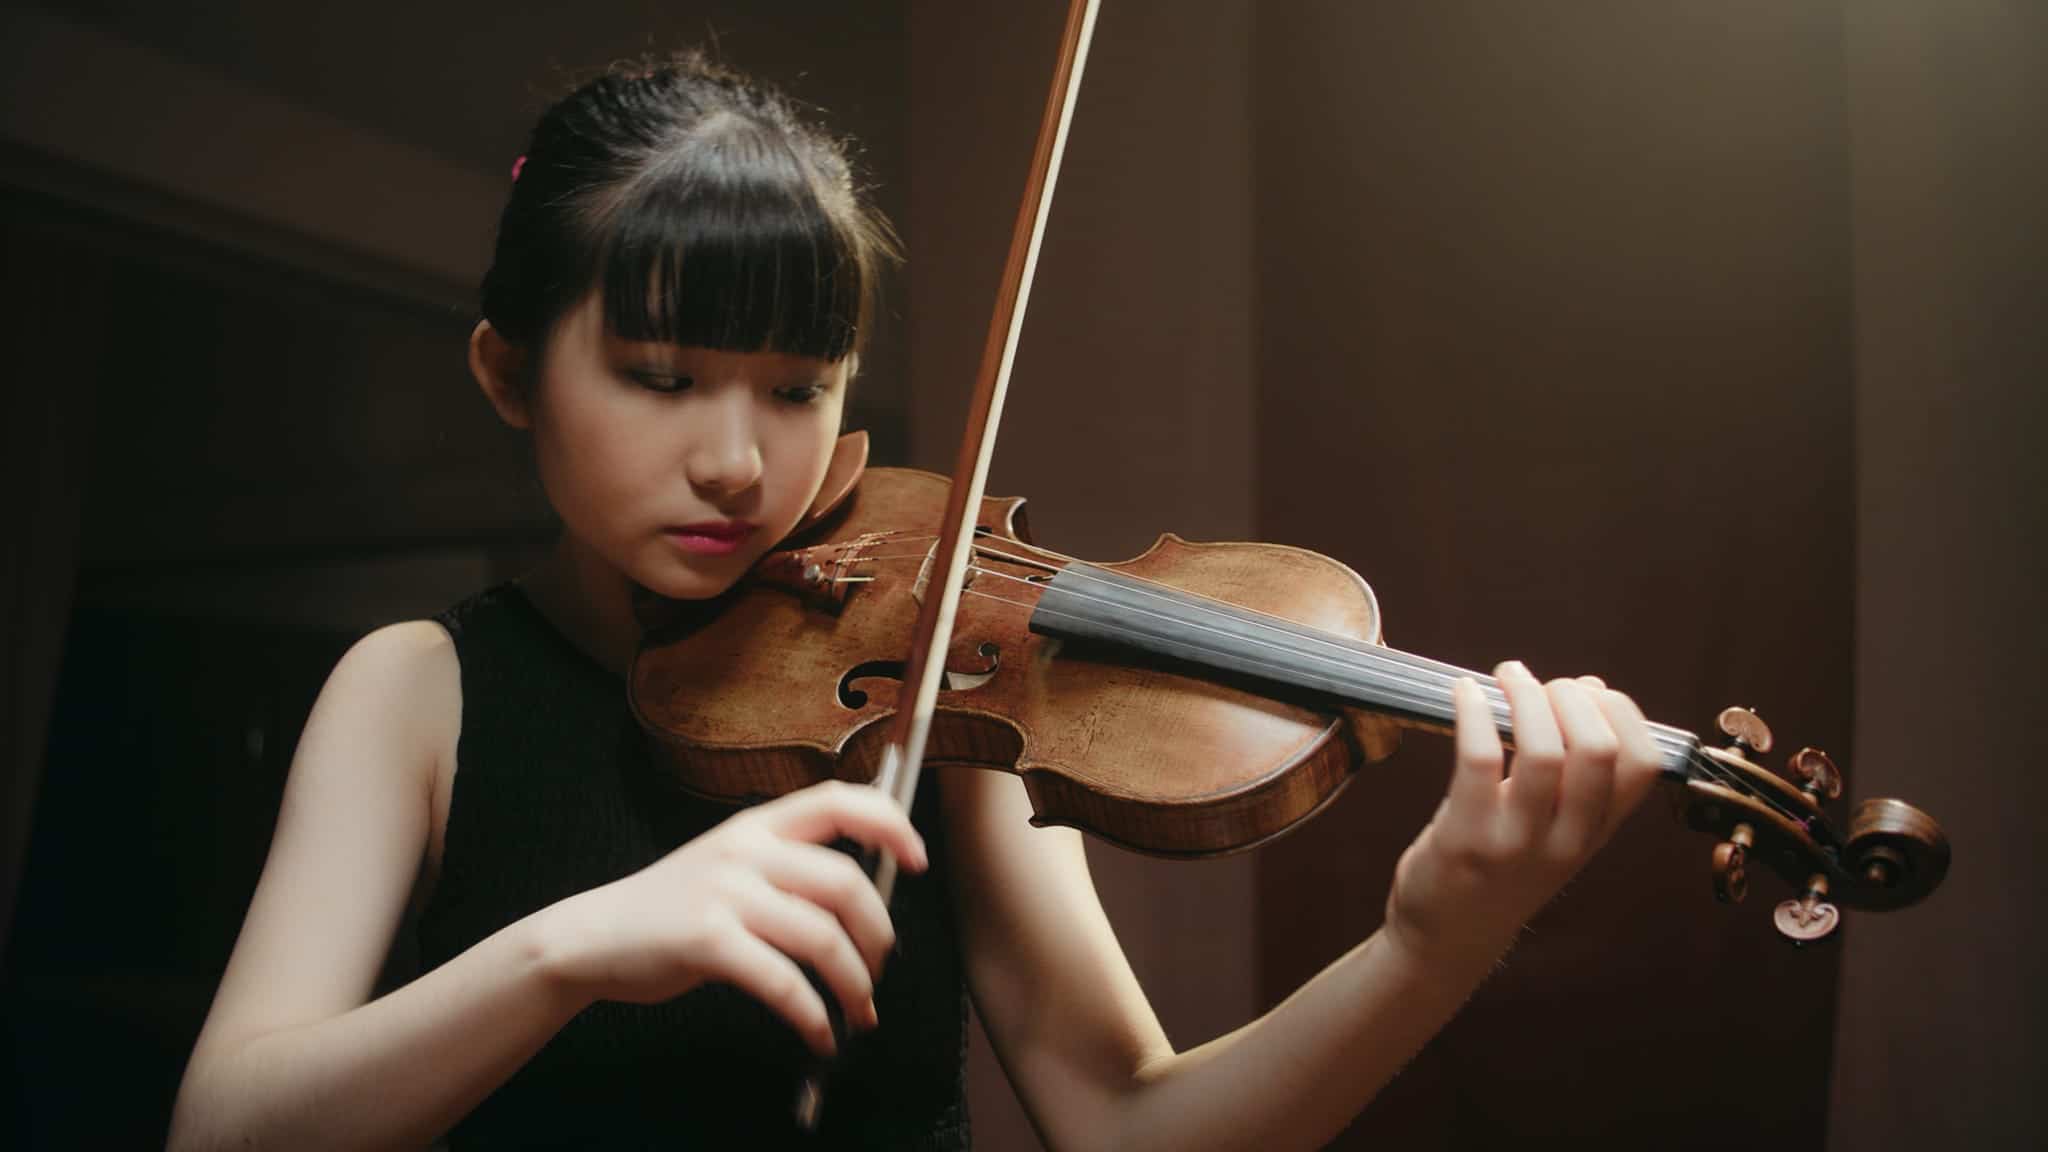 Girl, 15, is orchestra’s artist in residence